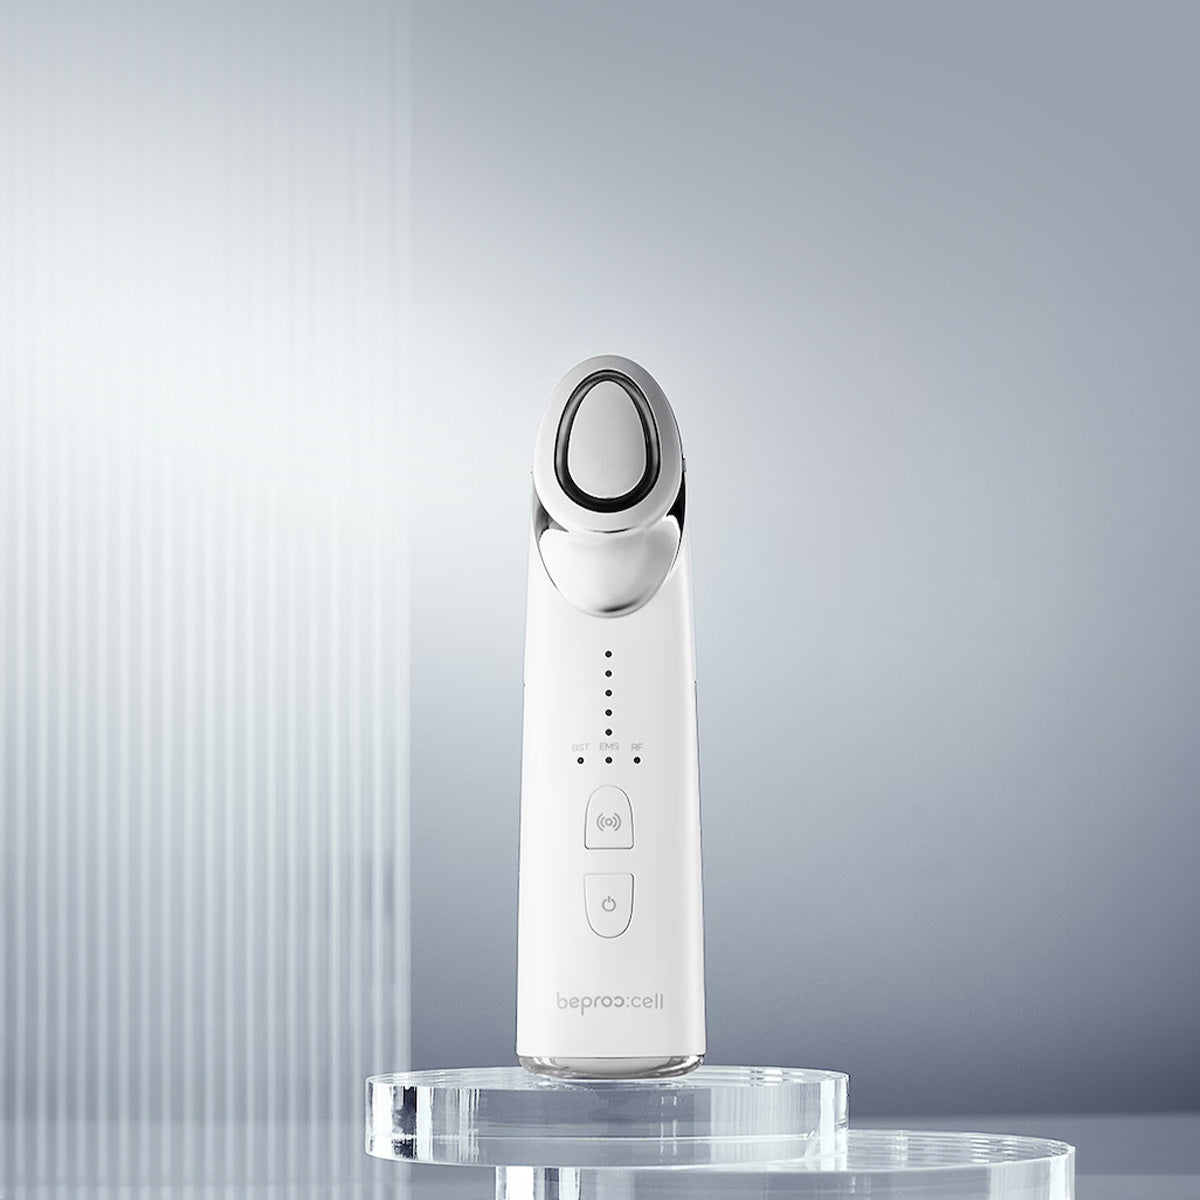 BEPROCCELL-High-Frequency-Skin-Care-Device.jpg